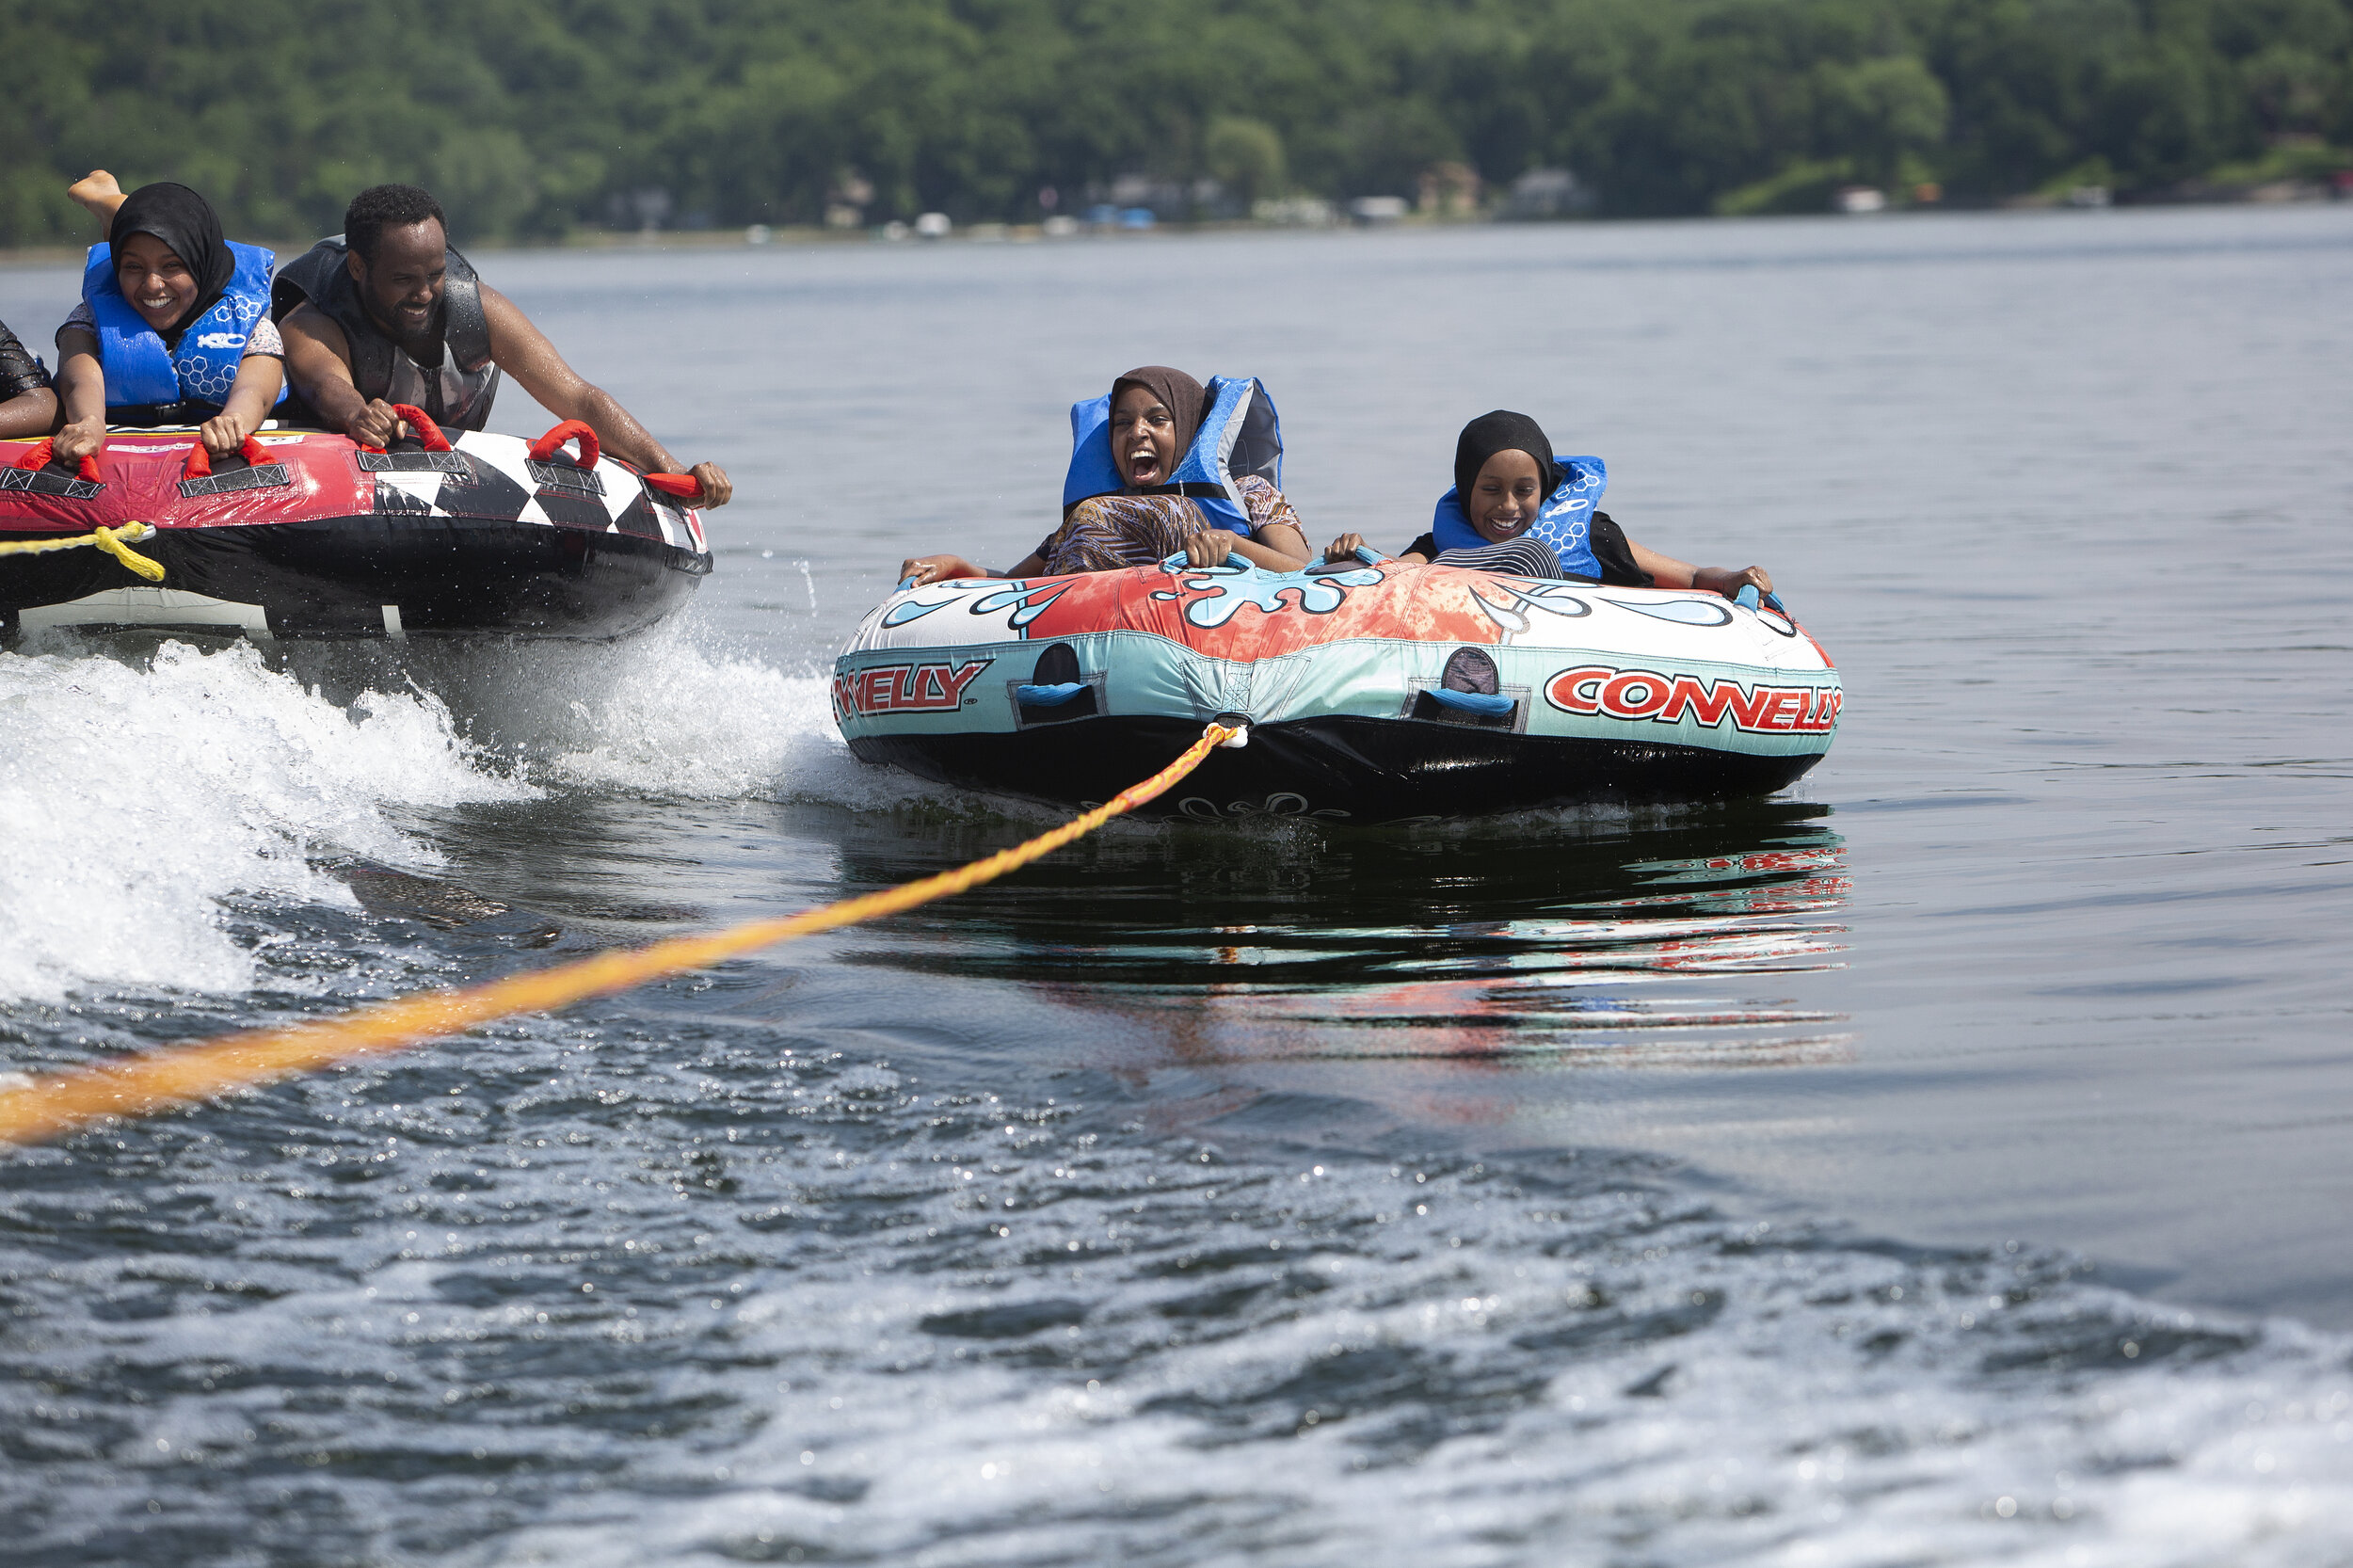  From left, Hafsa Musse, Mahdi Osman, Sucad Yusuf, and Samira Ahmed go water tubing. The summer camp is also a way to change perceptions about who enjoys outdoor recreation,&nbsp;said camp co-founder Mahdi Osman.    